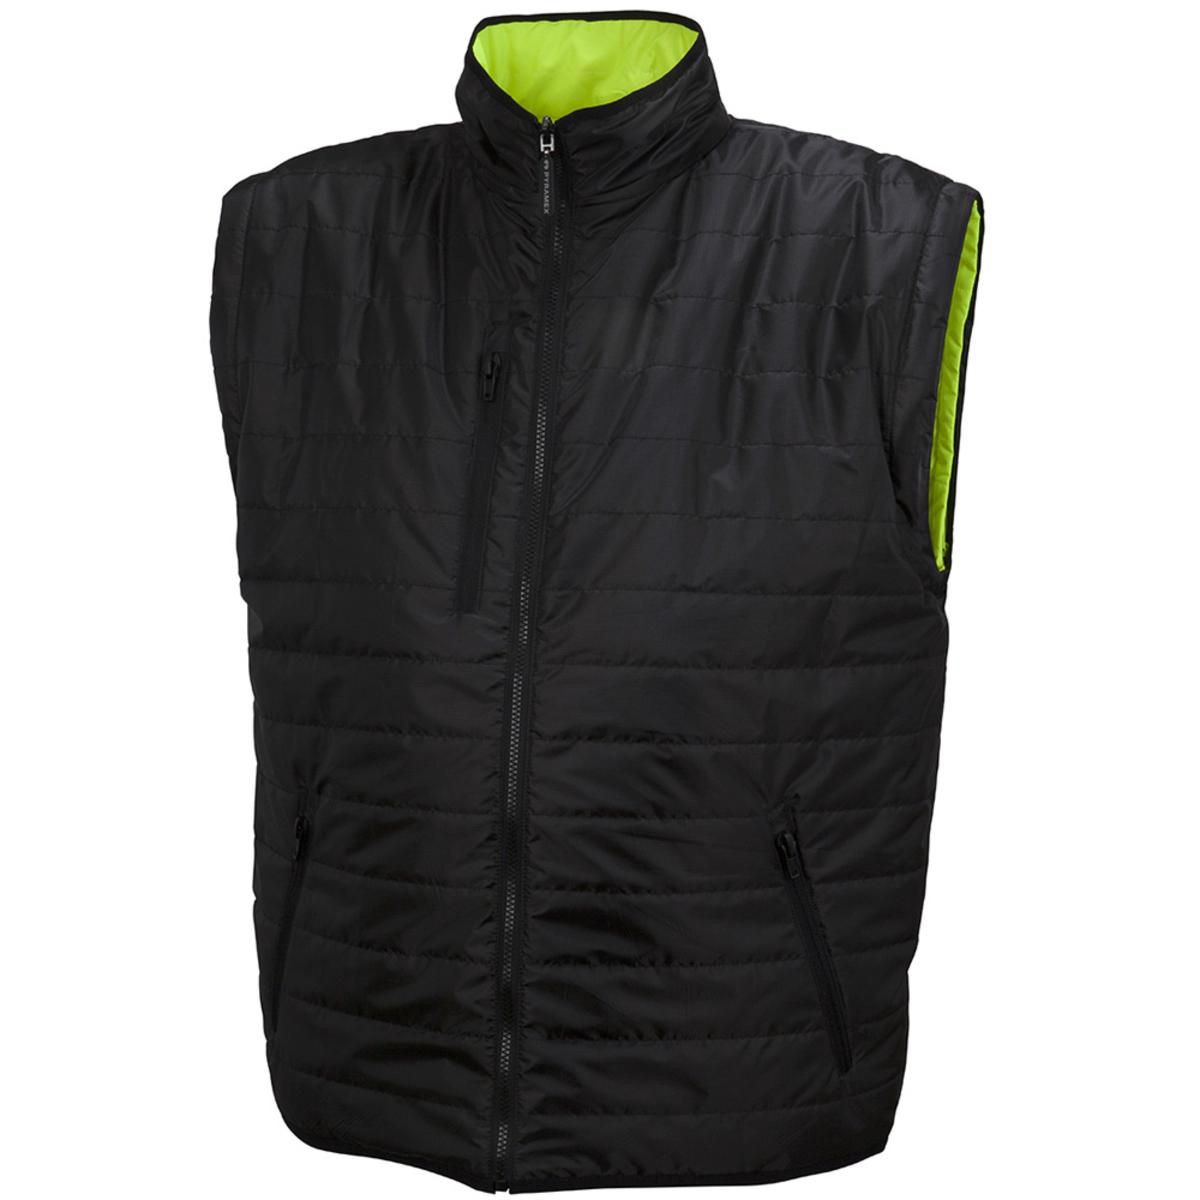 Pyramex Safety Winter Wear RJR33 Series Class 3 Hi-Vis Lime 4-in-1 Quilted Reversible Jacket